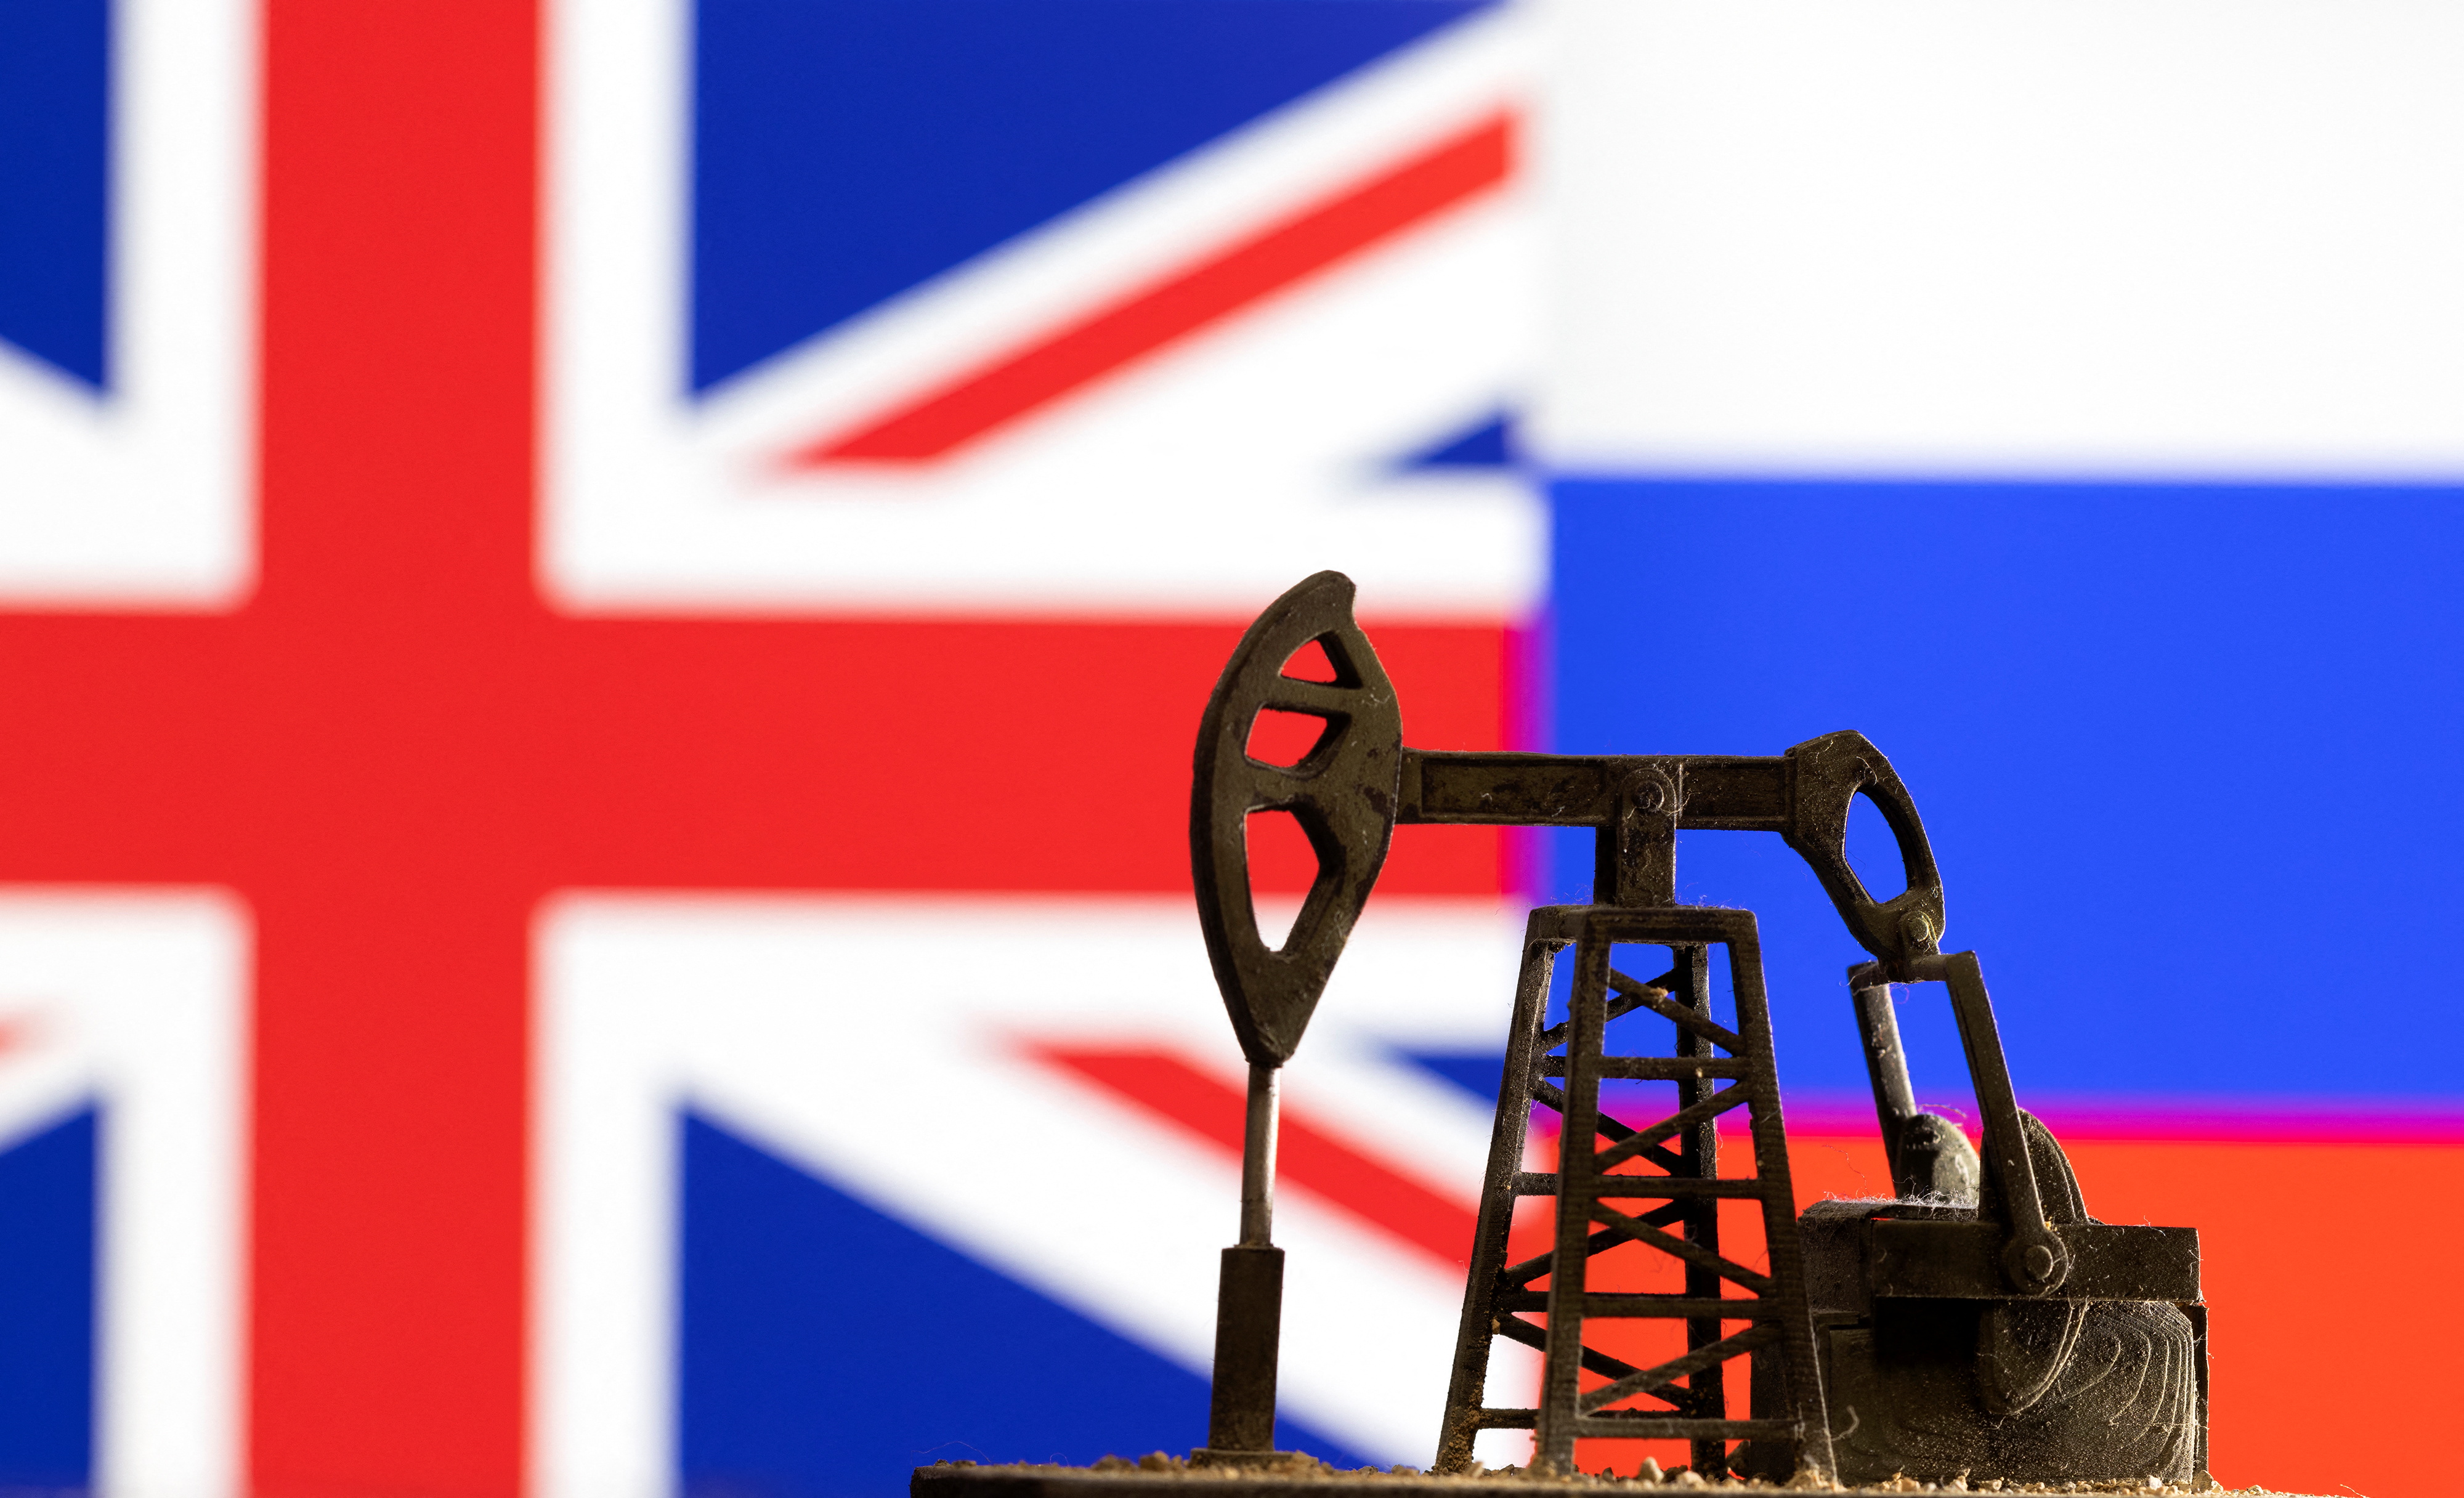 Illustration shows pump jack in front UK and Russia flag colours